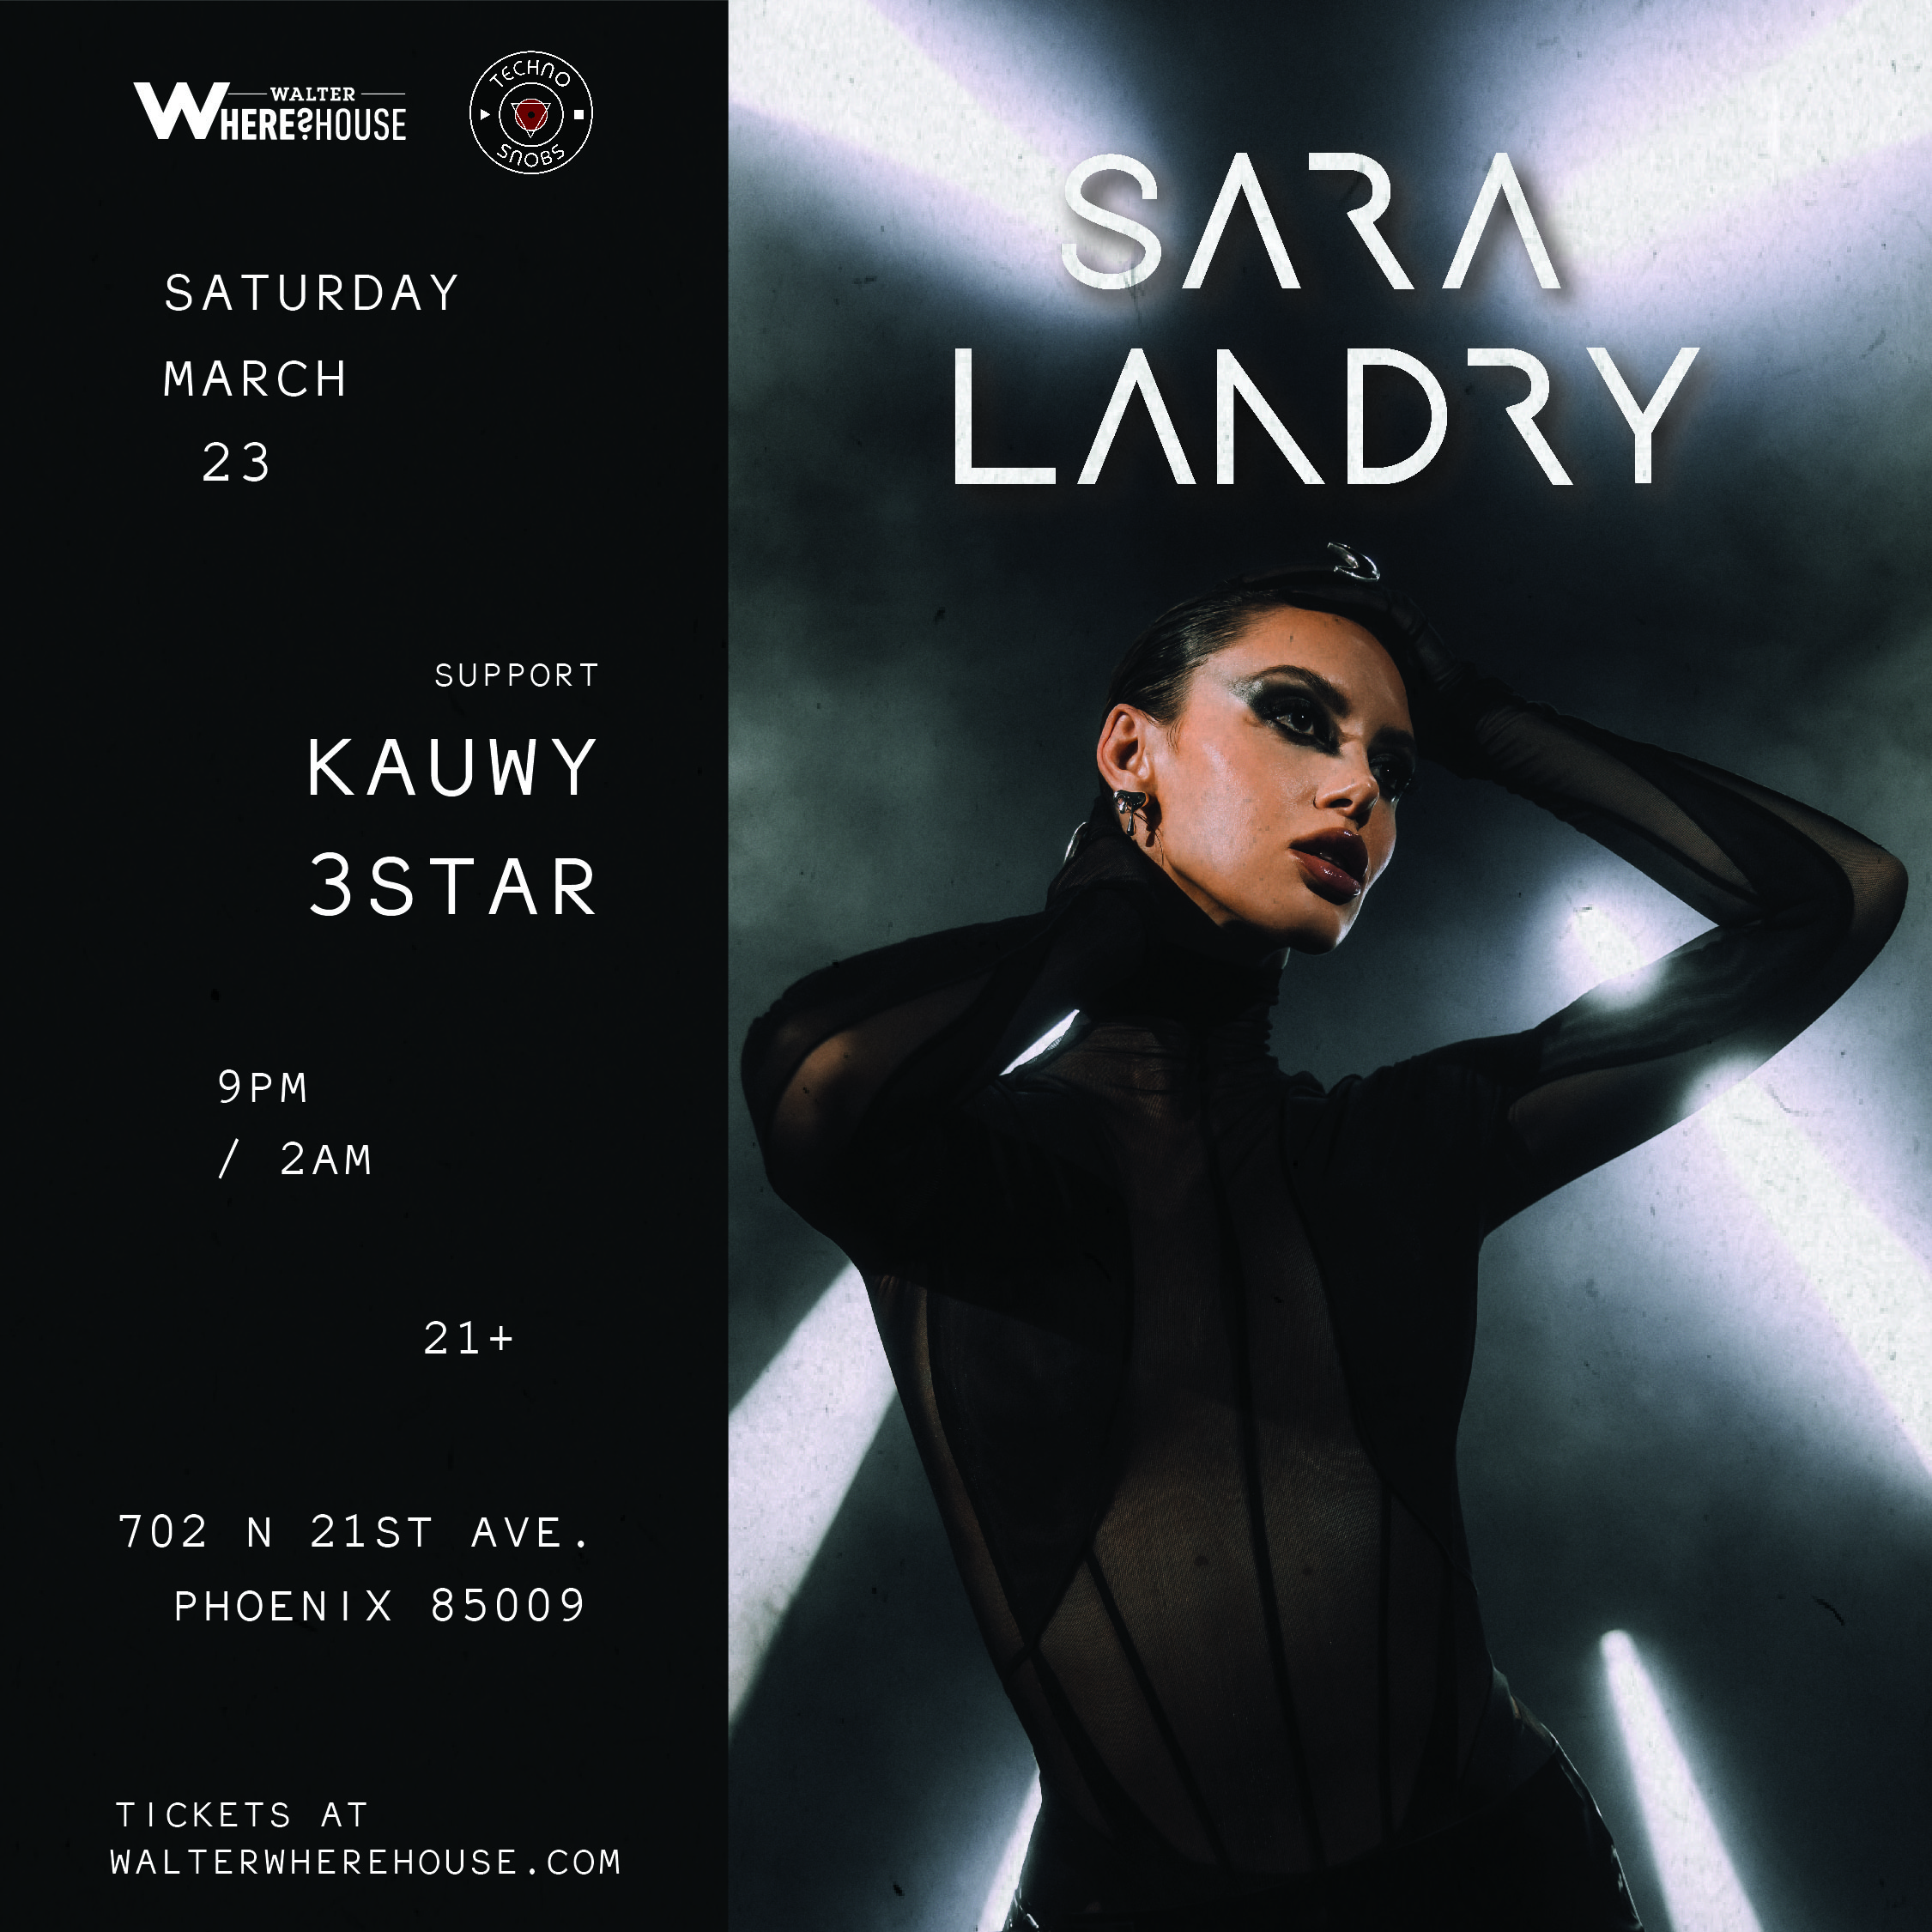 Buy tickets to Techno Snobs: Sara Landry at Walter Where?House in